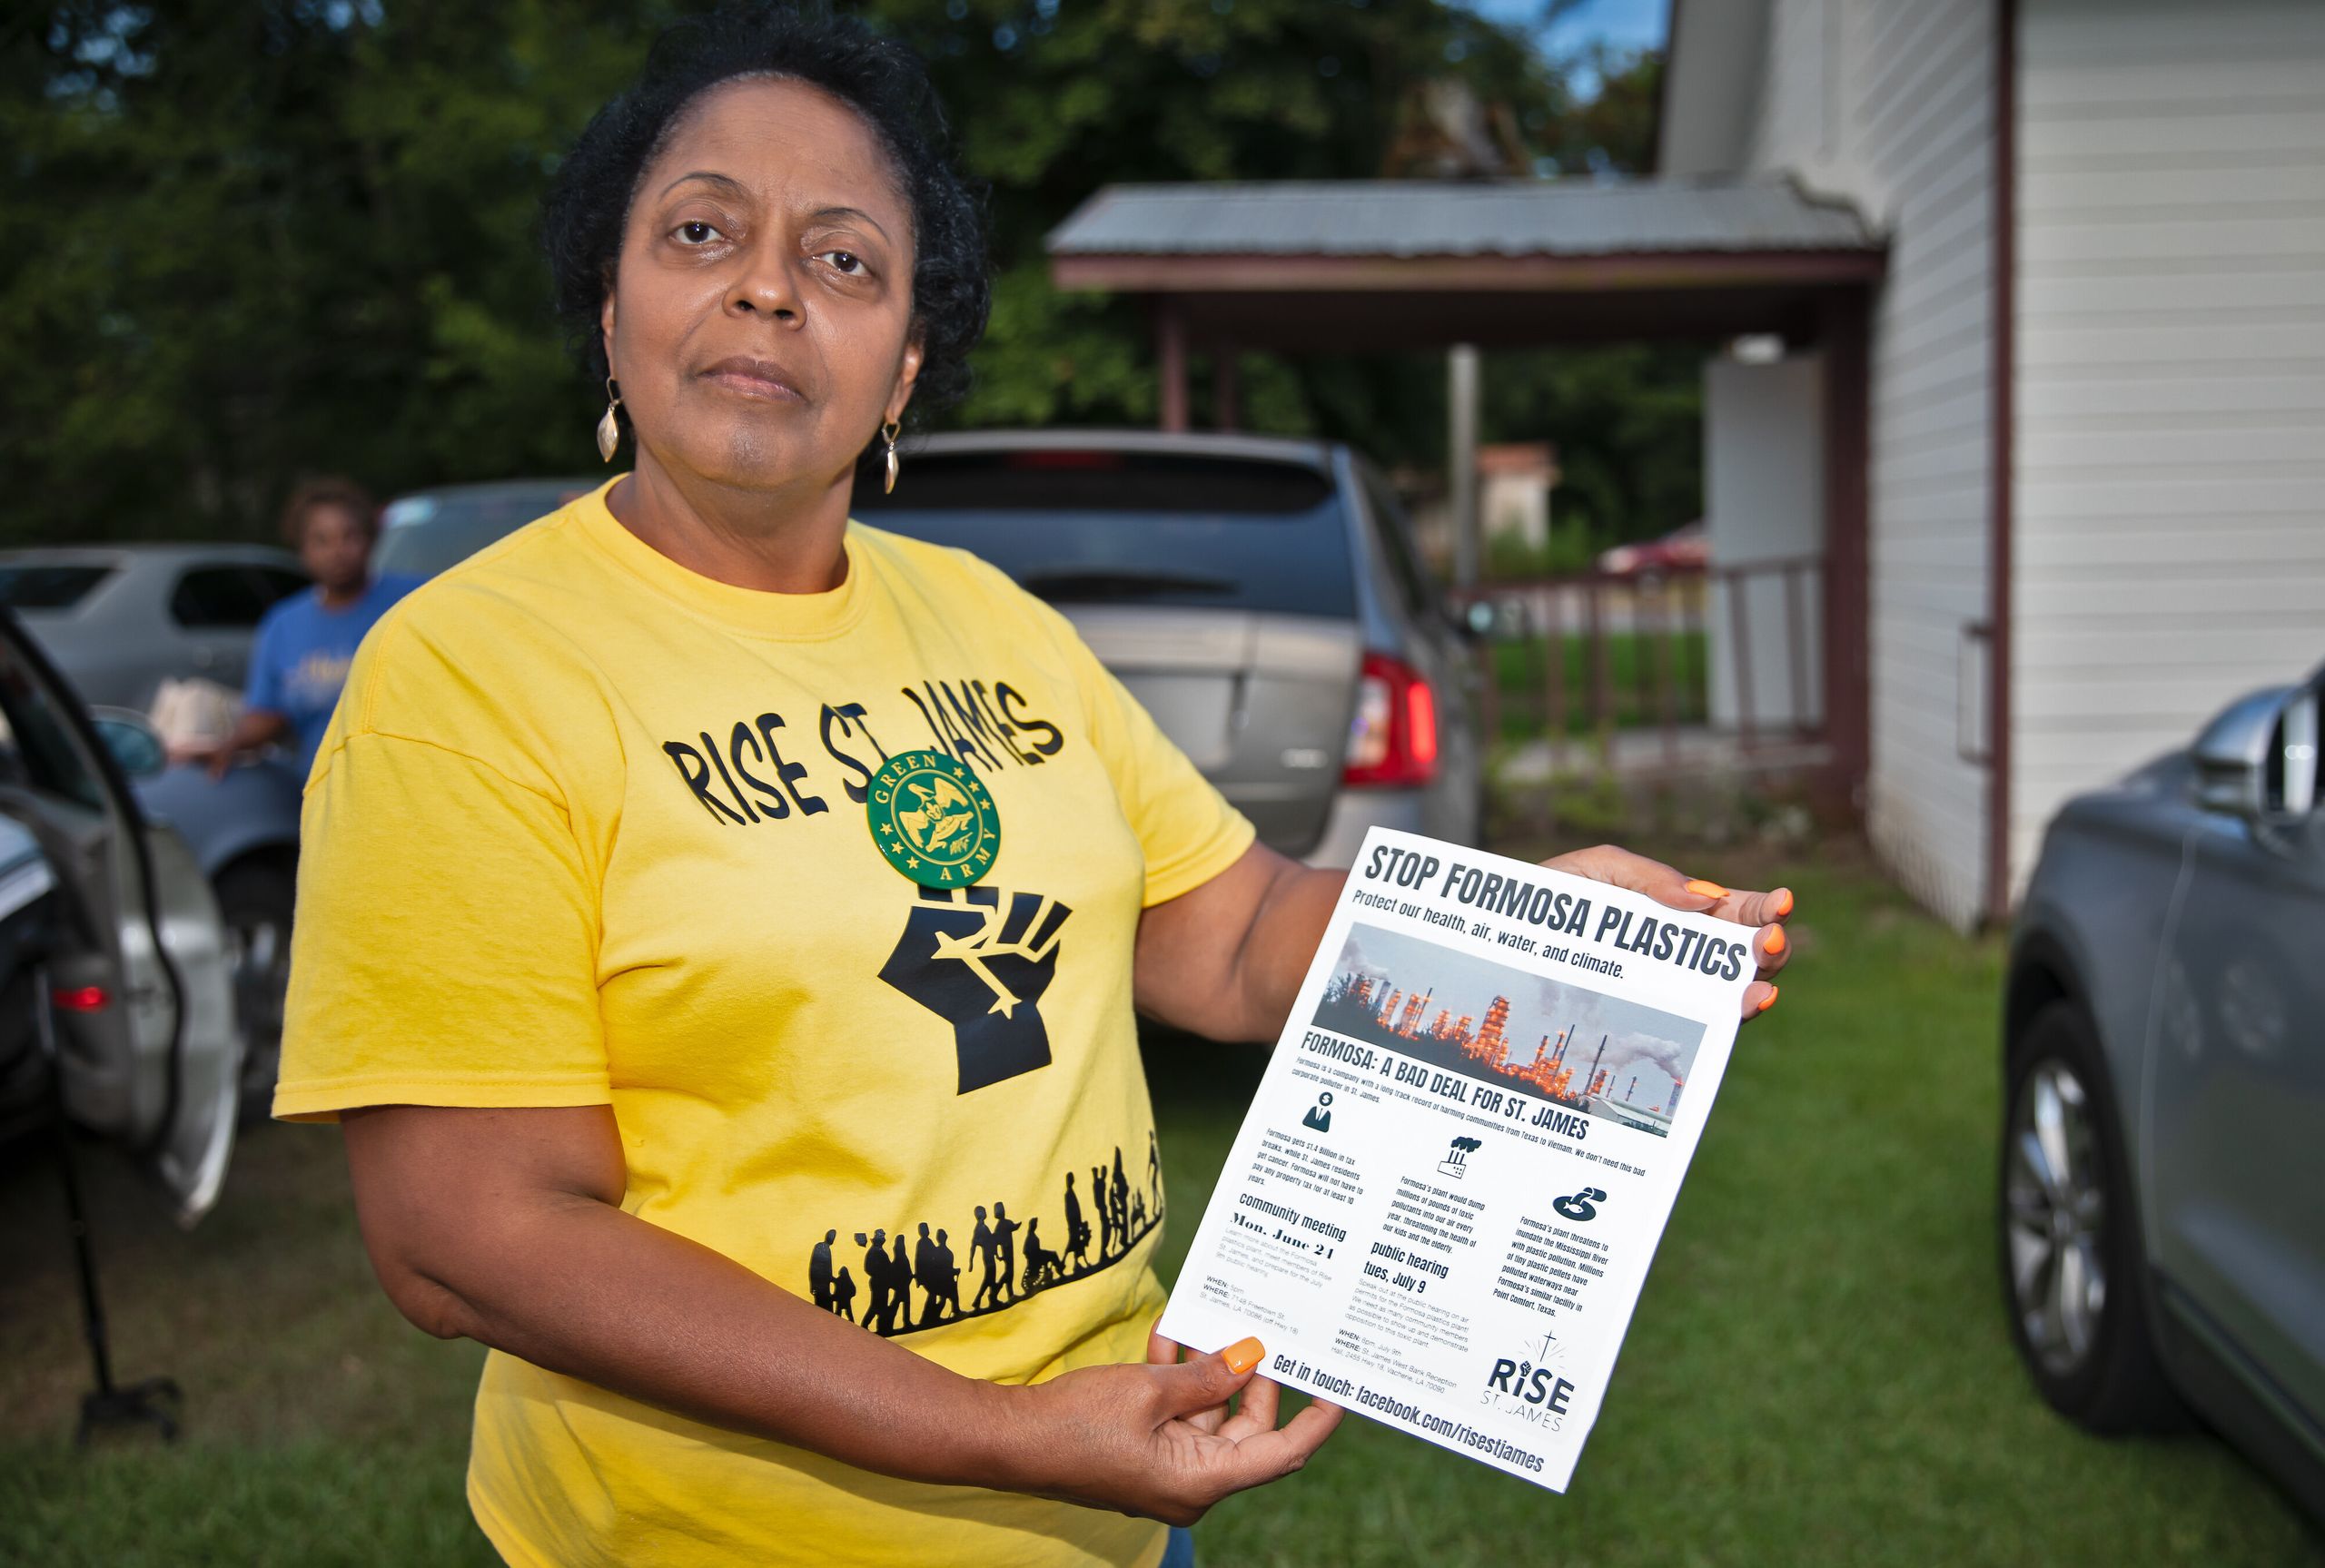 Sharon Lavinge founder of RISE St. James in front of the Mt. Triumph Baptist Church with a flyer about the proposed Formosa plant